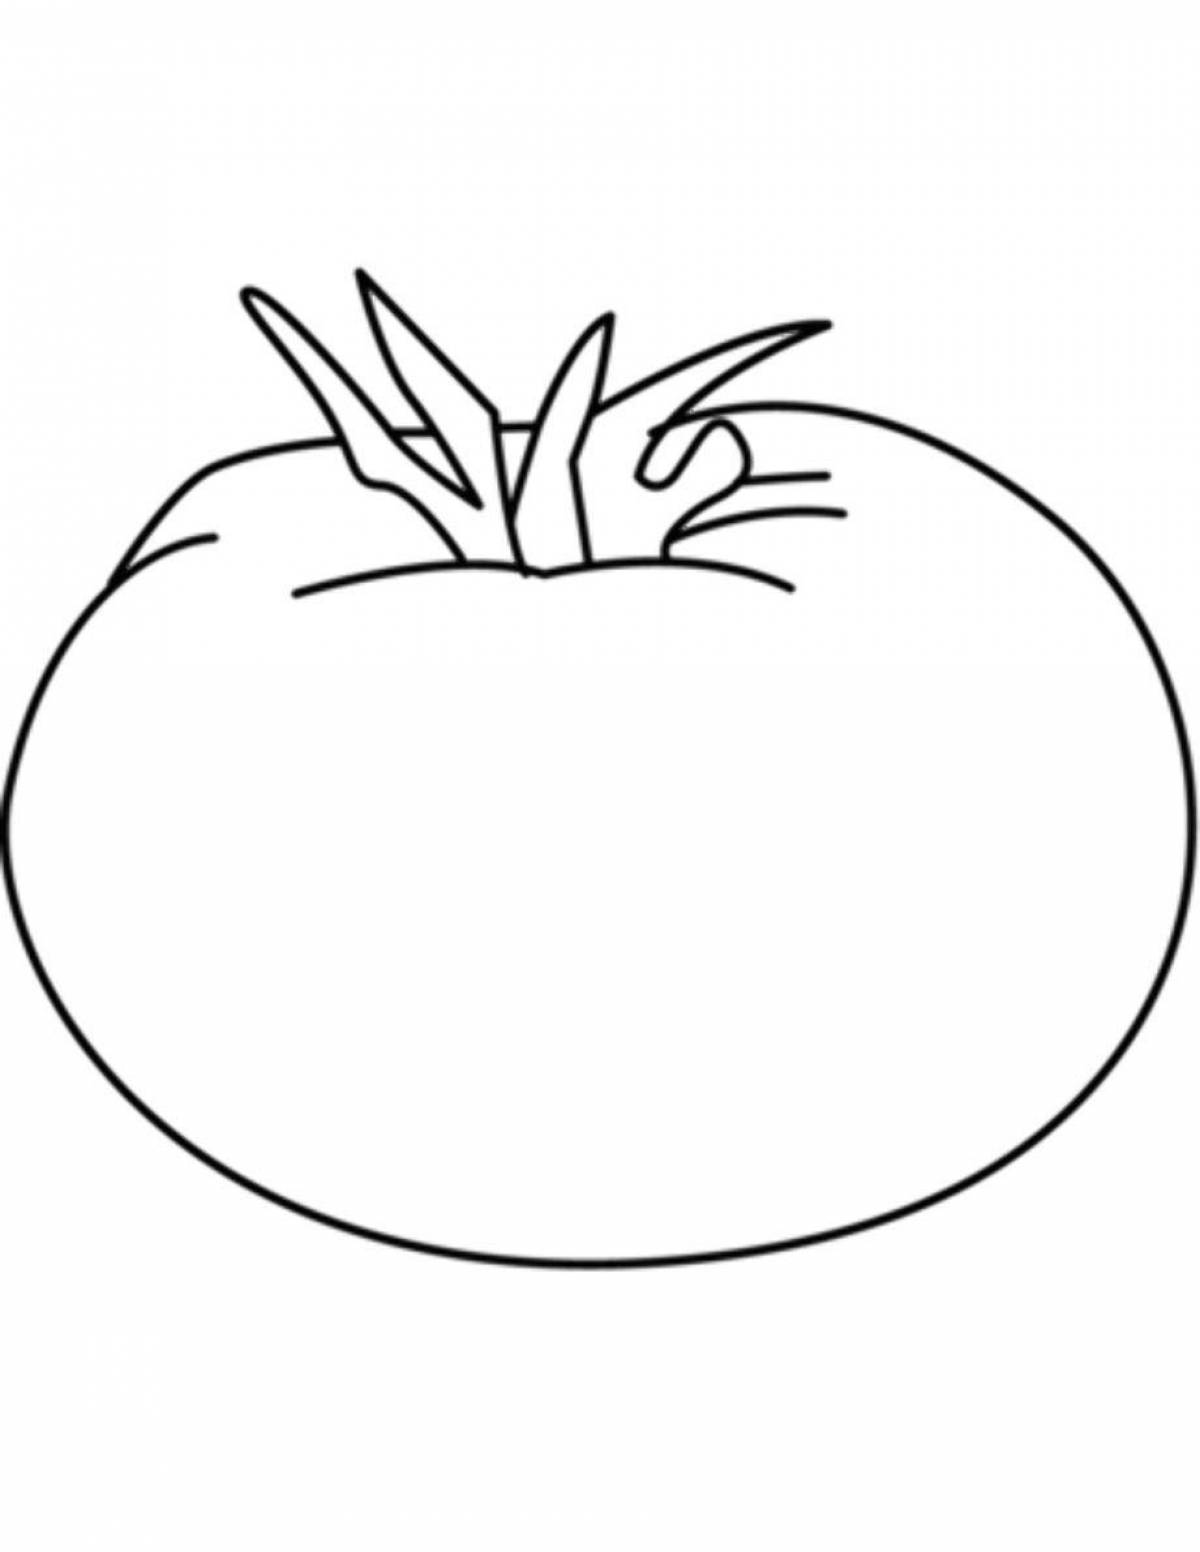 Colored tomato coloring pages for 3-4 year olds